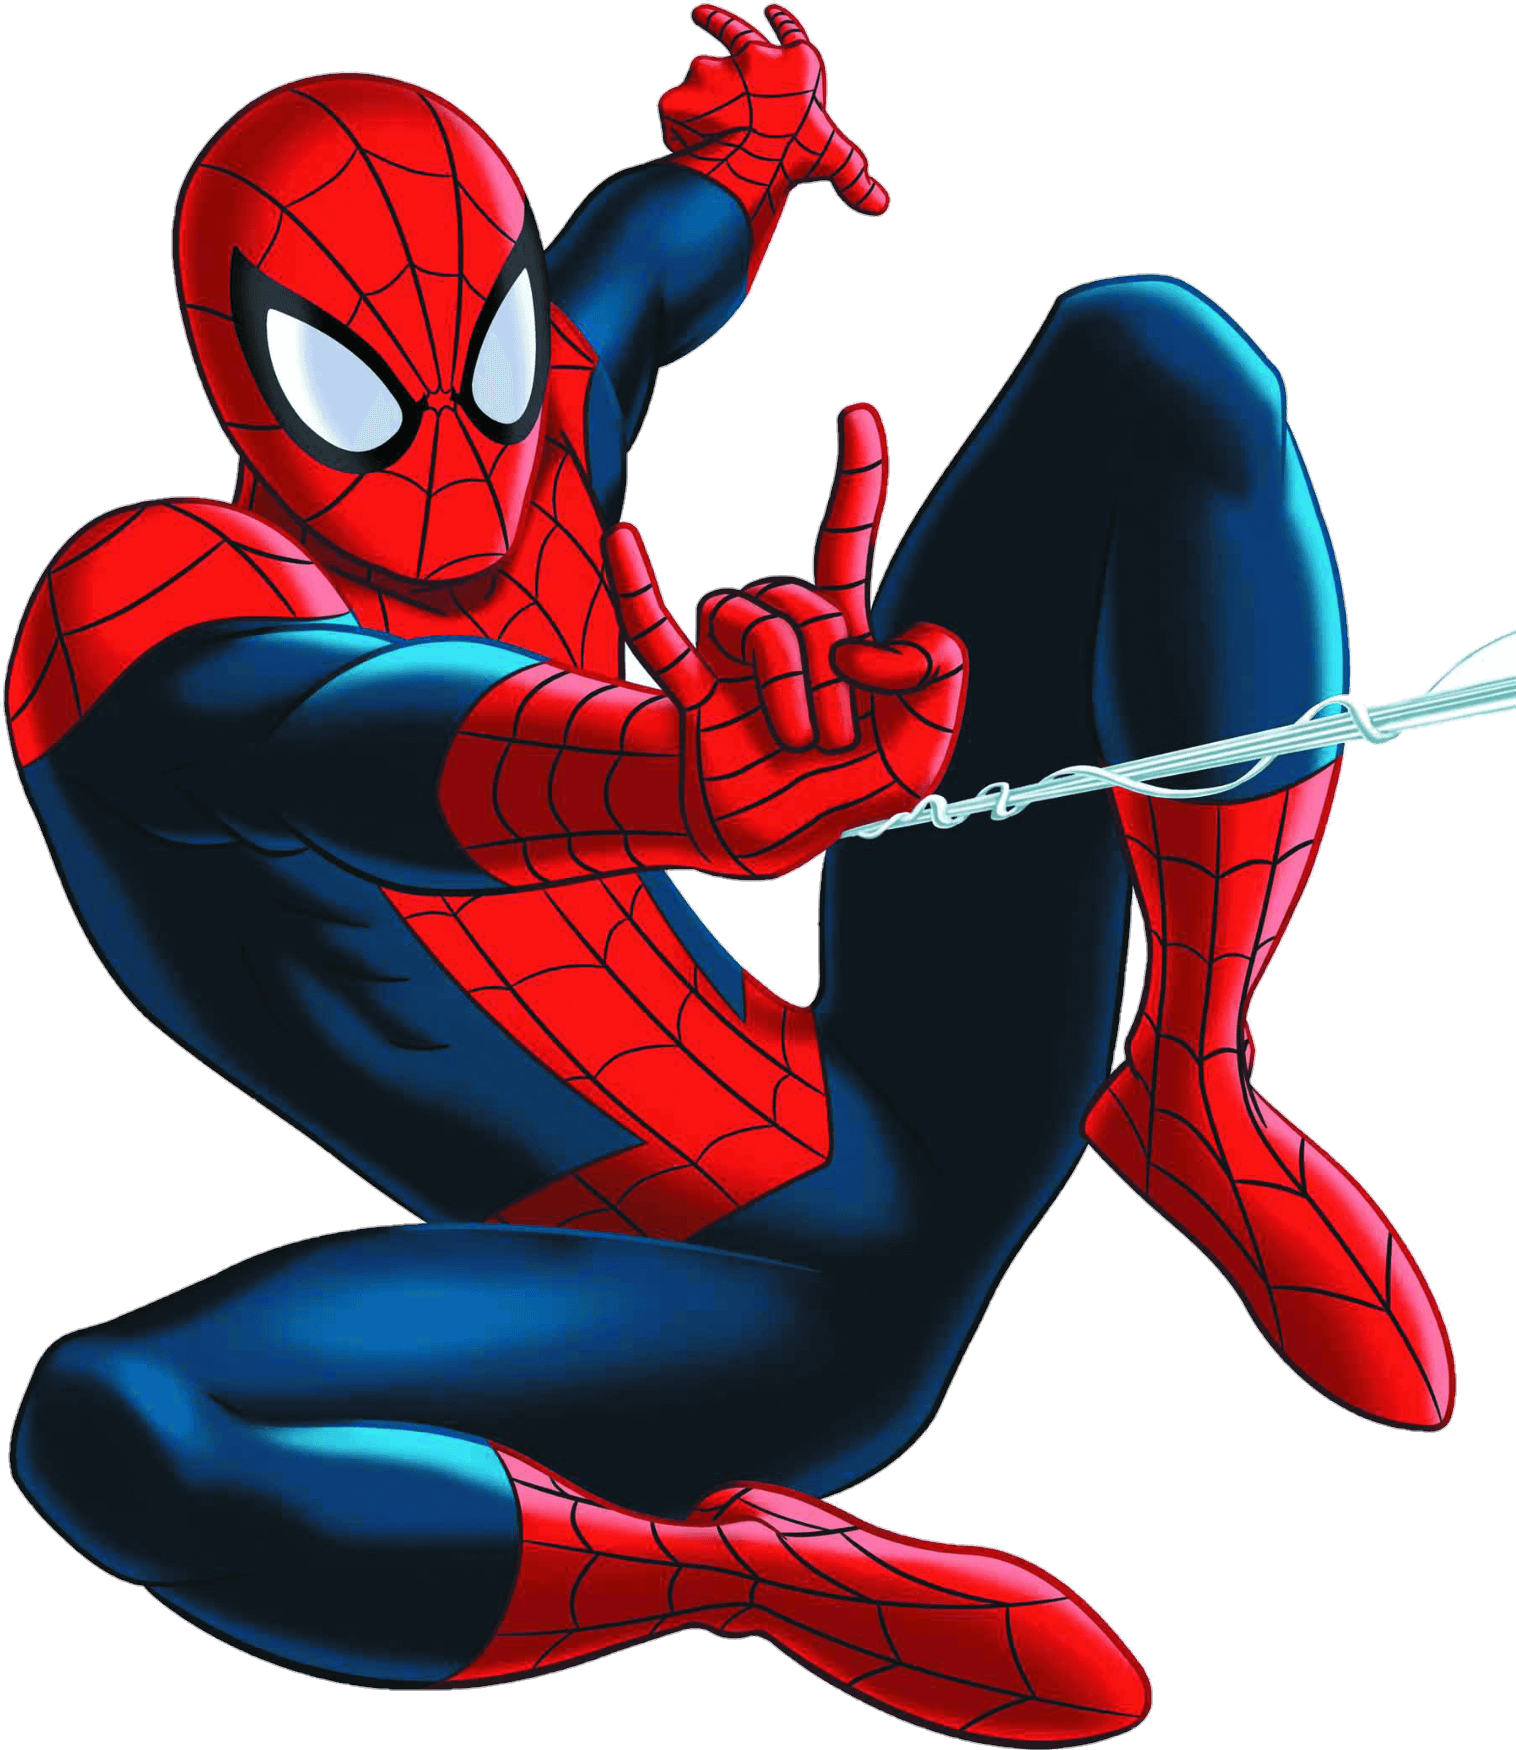 spider-man-png-from-pngfre-45-1